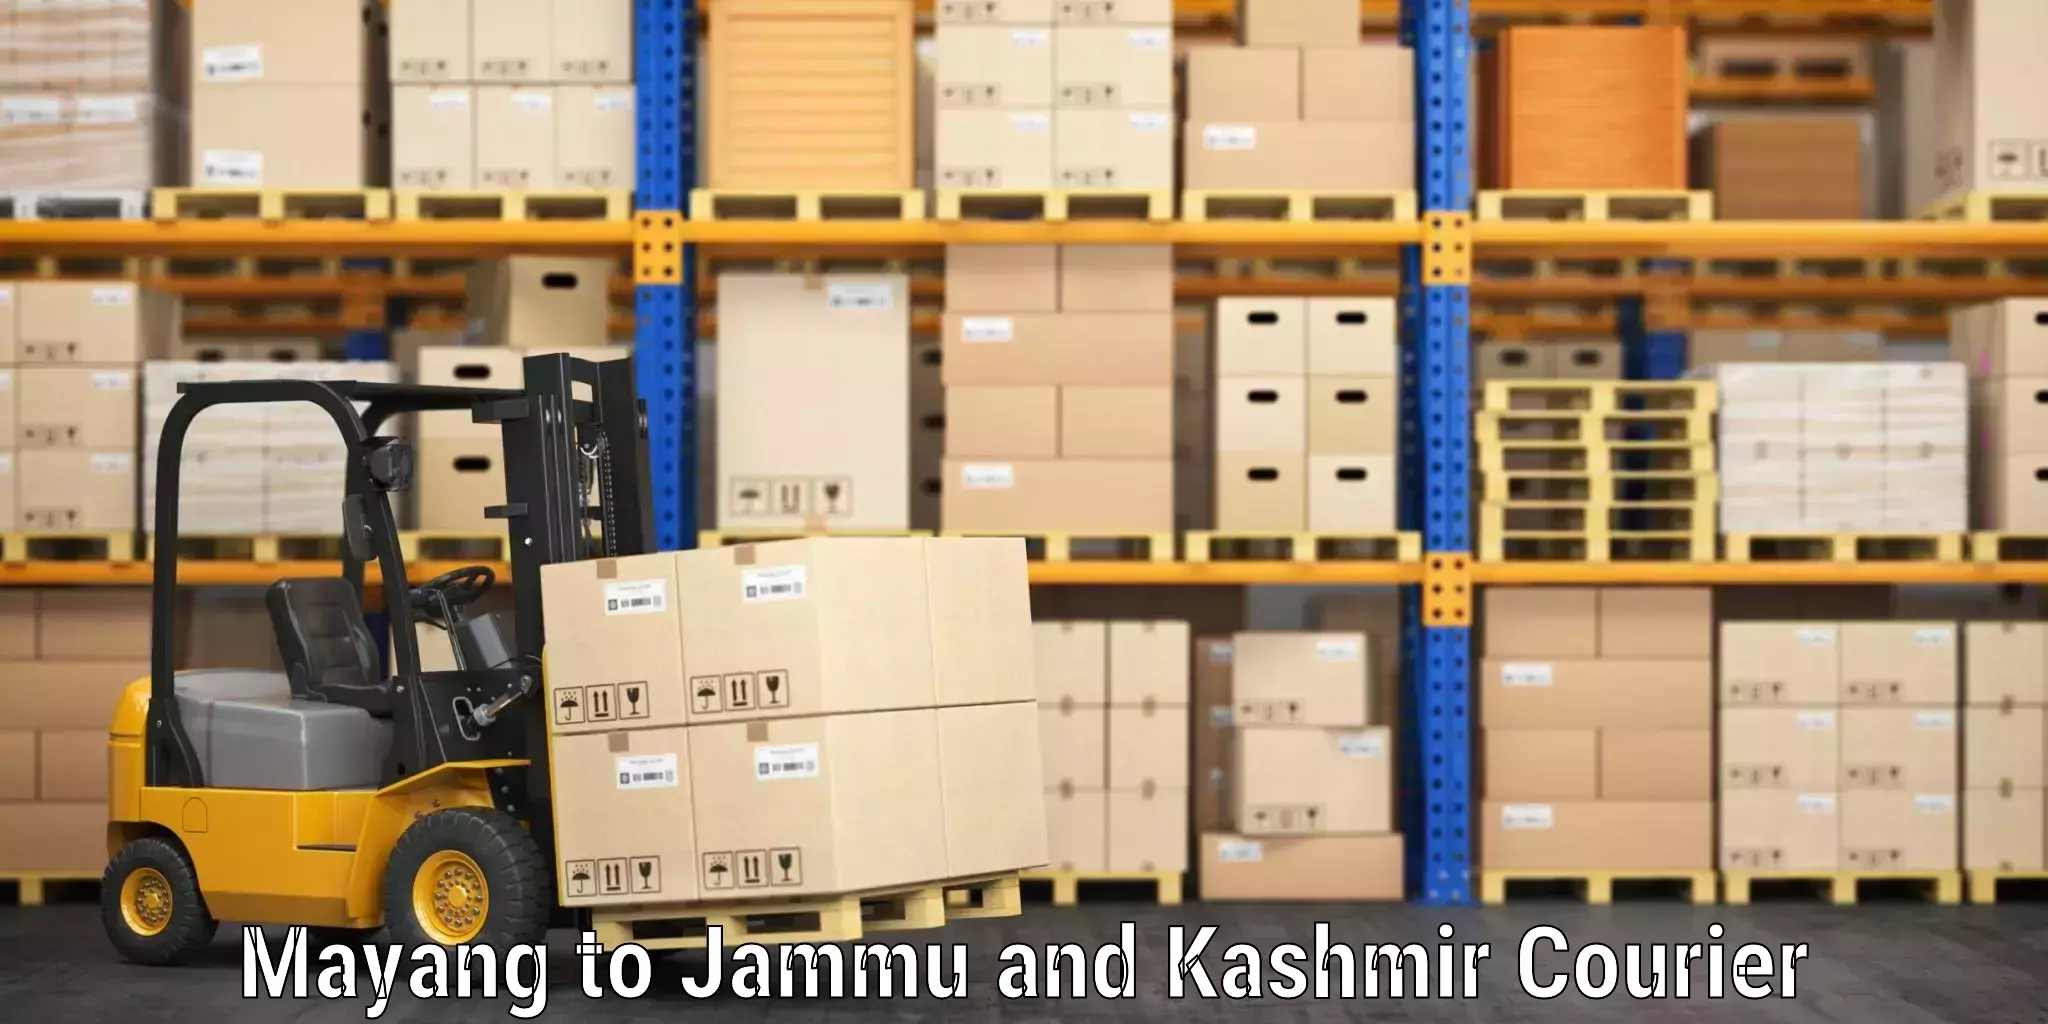 Baggage shipping schedule Mayang to Jammu and Kashmir